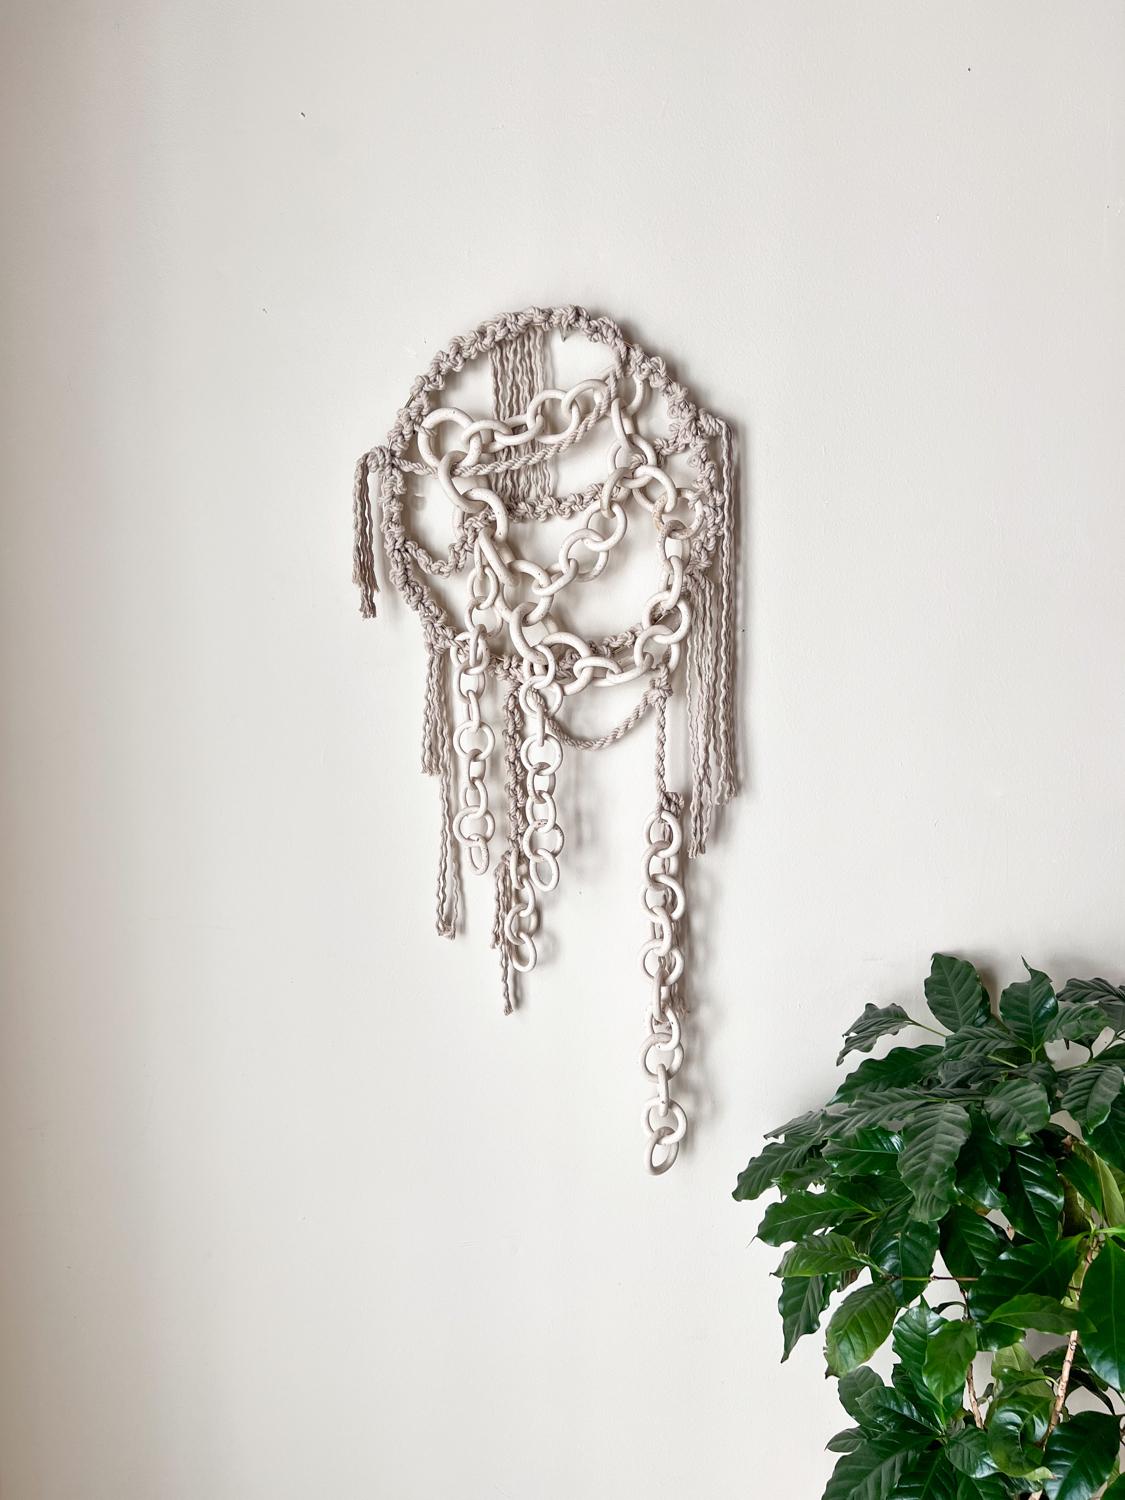 This eye-catching wall hanging adds a nomadic feel to any room. Created through a hand-intensive process of linking hand built stoneware rings of different sizes, this wall hanging is a dynamic decoration for an eclectic bedroom or living room.